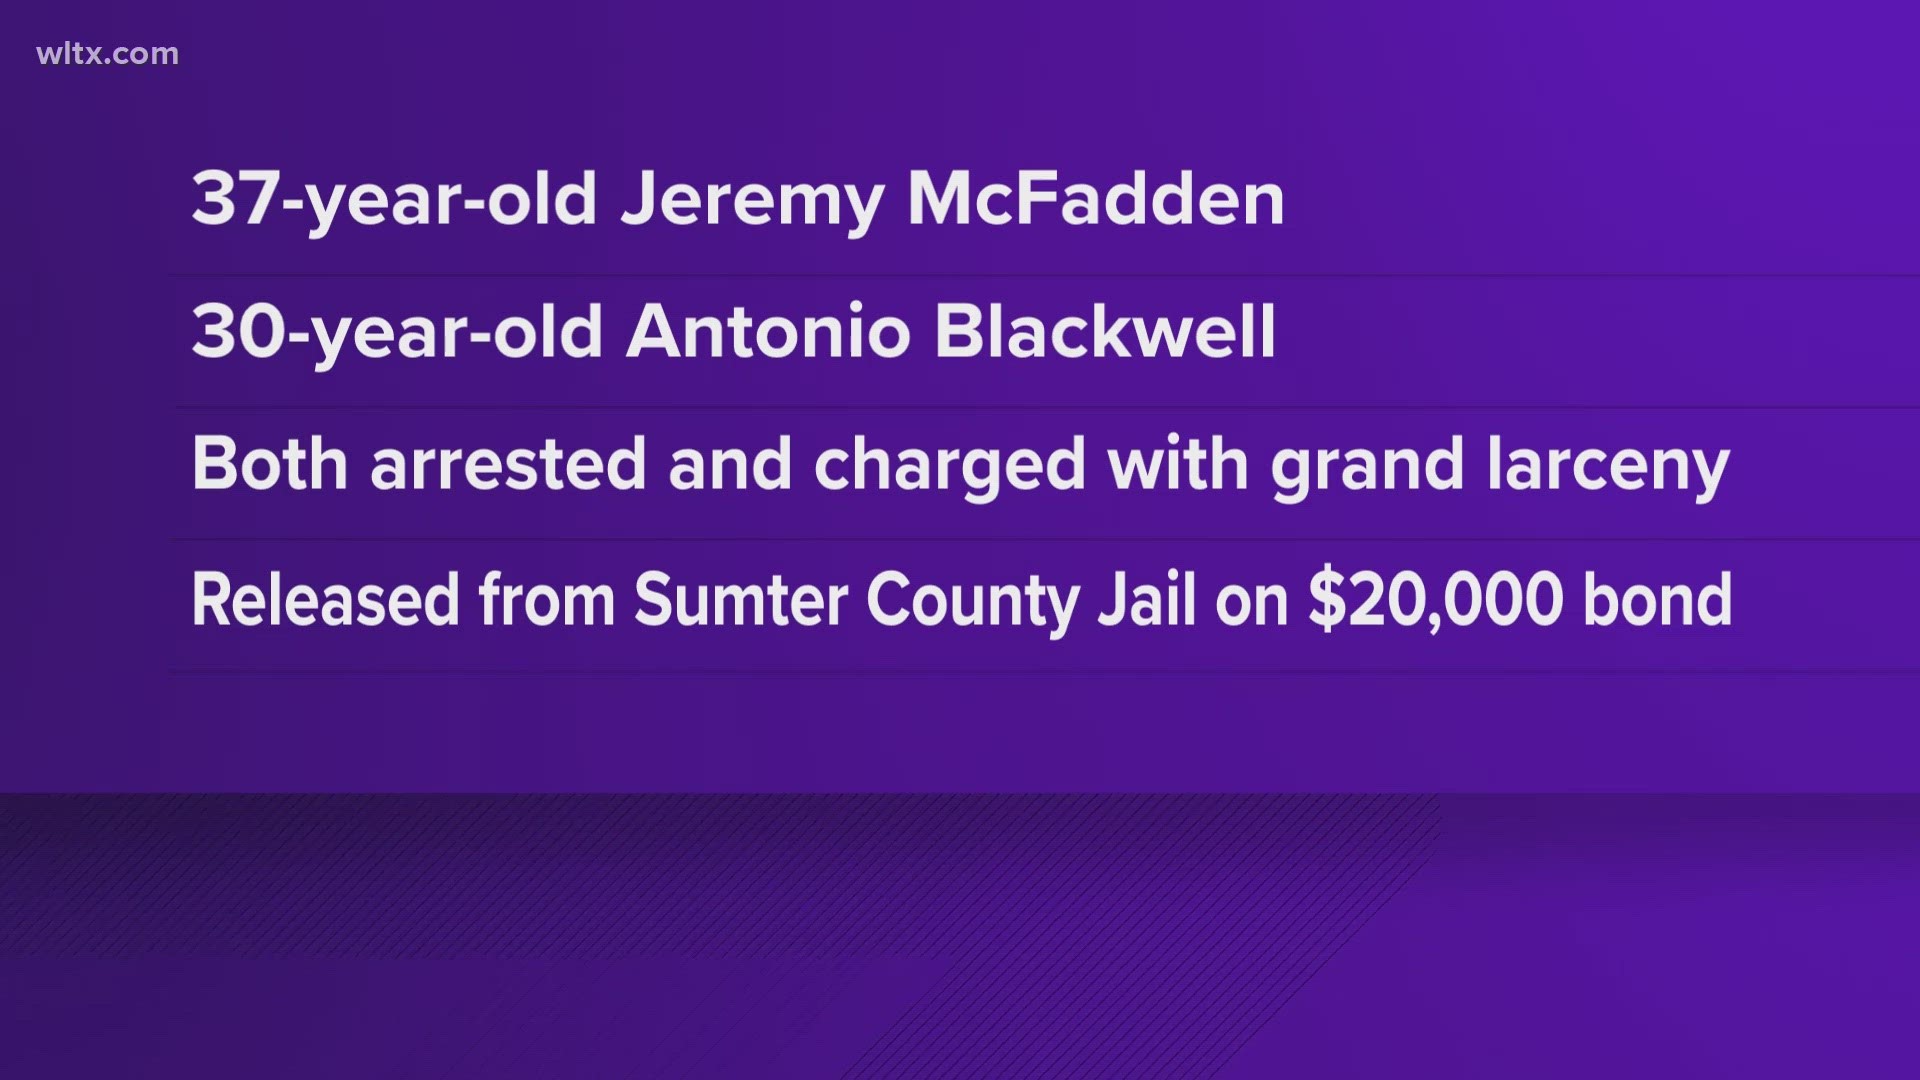 Jeremy McFadden, 37 and Antonio Blackwell, 30 were arrested and charged with grand larceny.